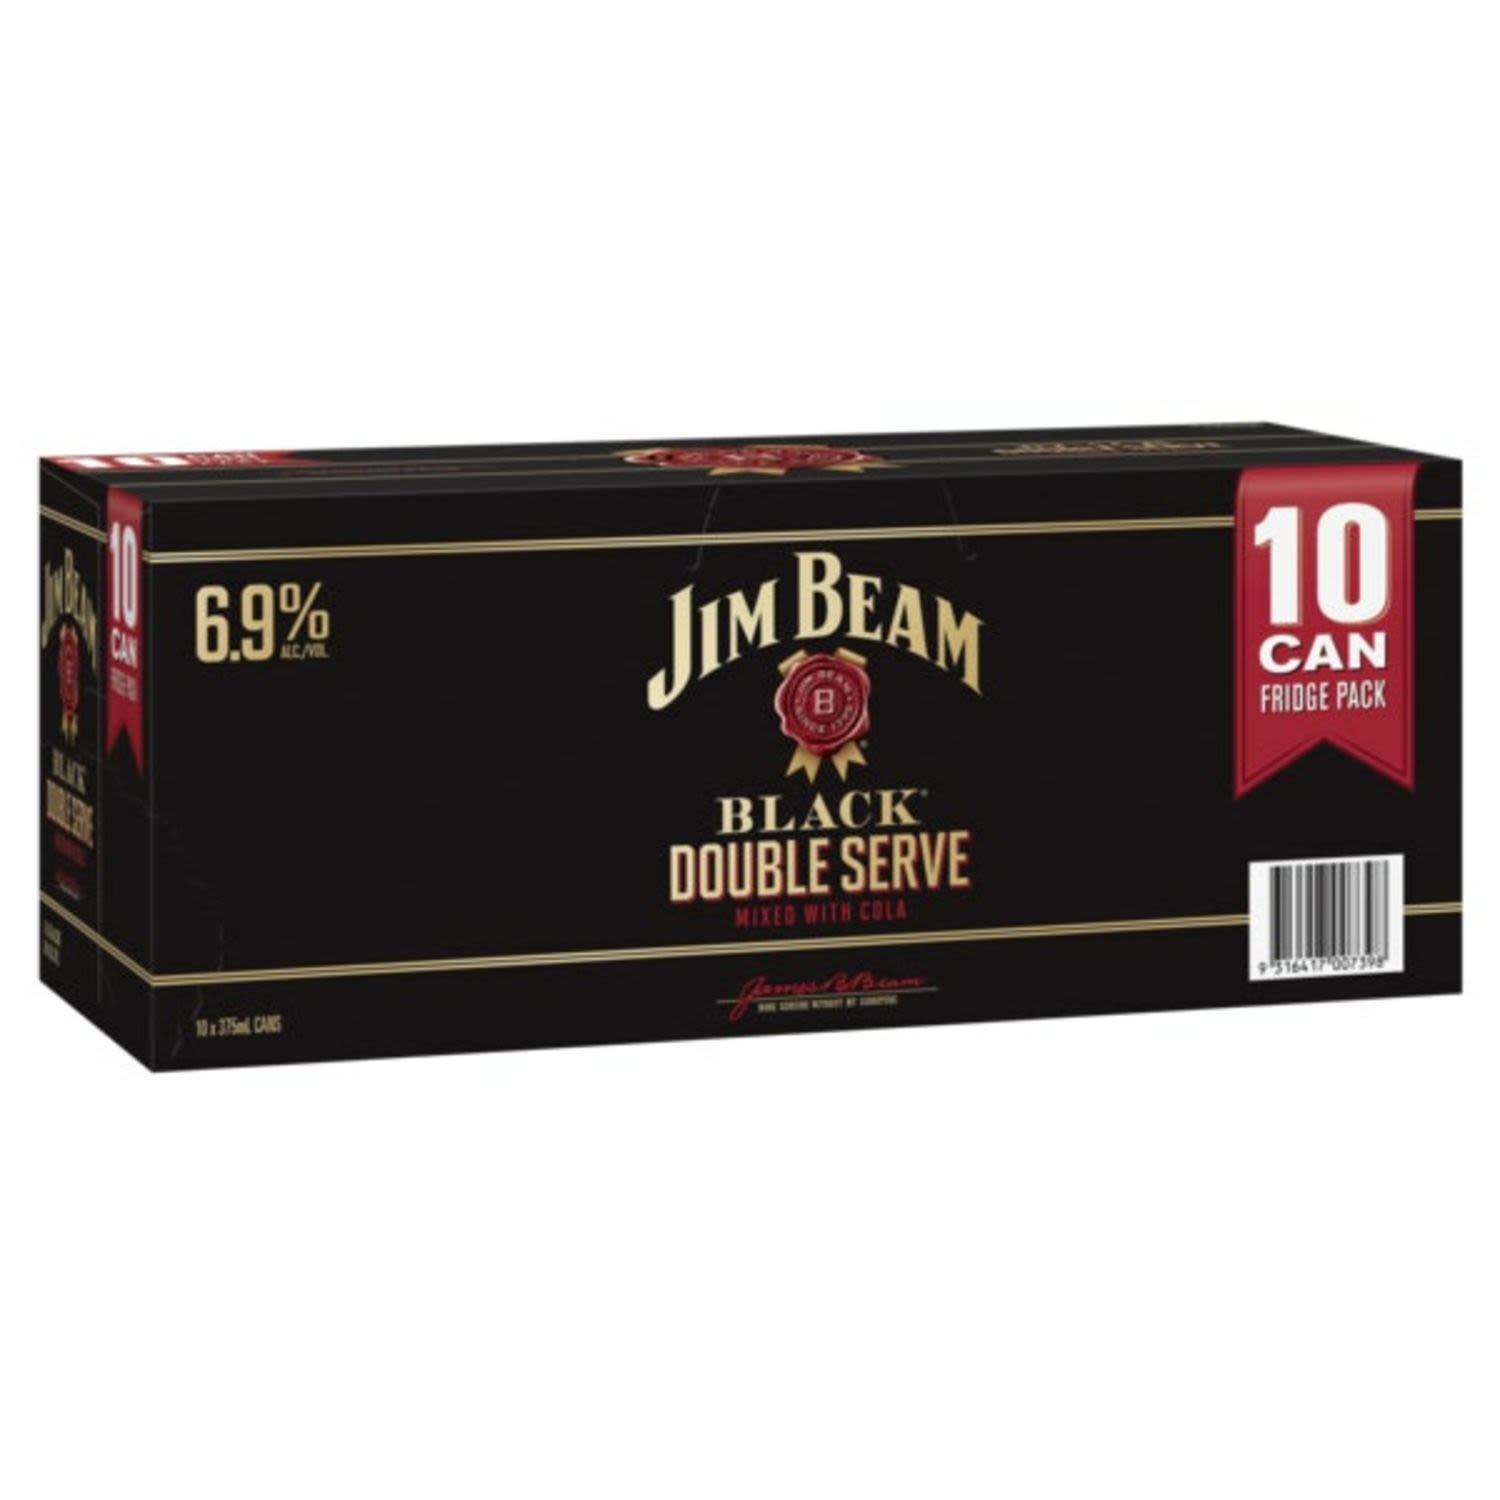 Jim Beam Black Double Serve delivers two servings of the premium, extra-aged Jim Beam Black Bourbon you love, pre-mixed with quality cola.<br /> <br />Alcohol Volume: 6.90%<br /><br />Pack Format: 10 Pack<br /><br />Standard Drinks: 2.1<br /><br />Pack Type: Can<br />